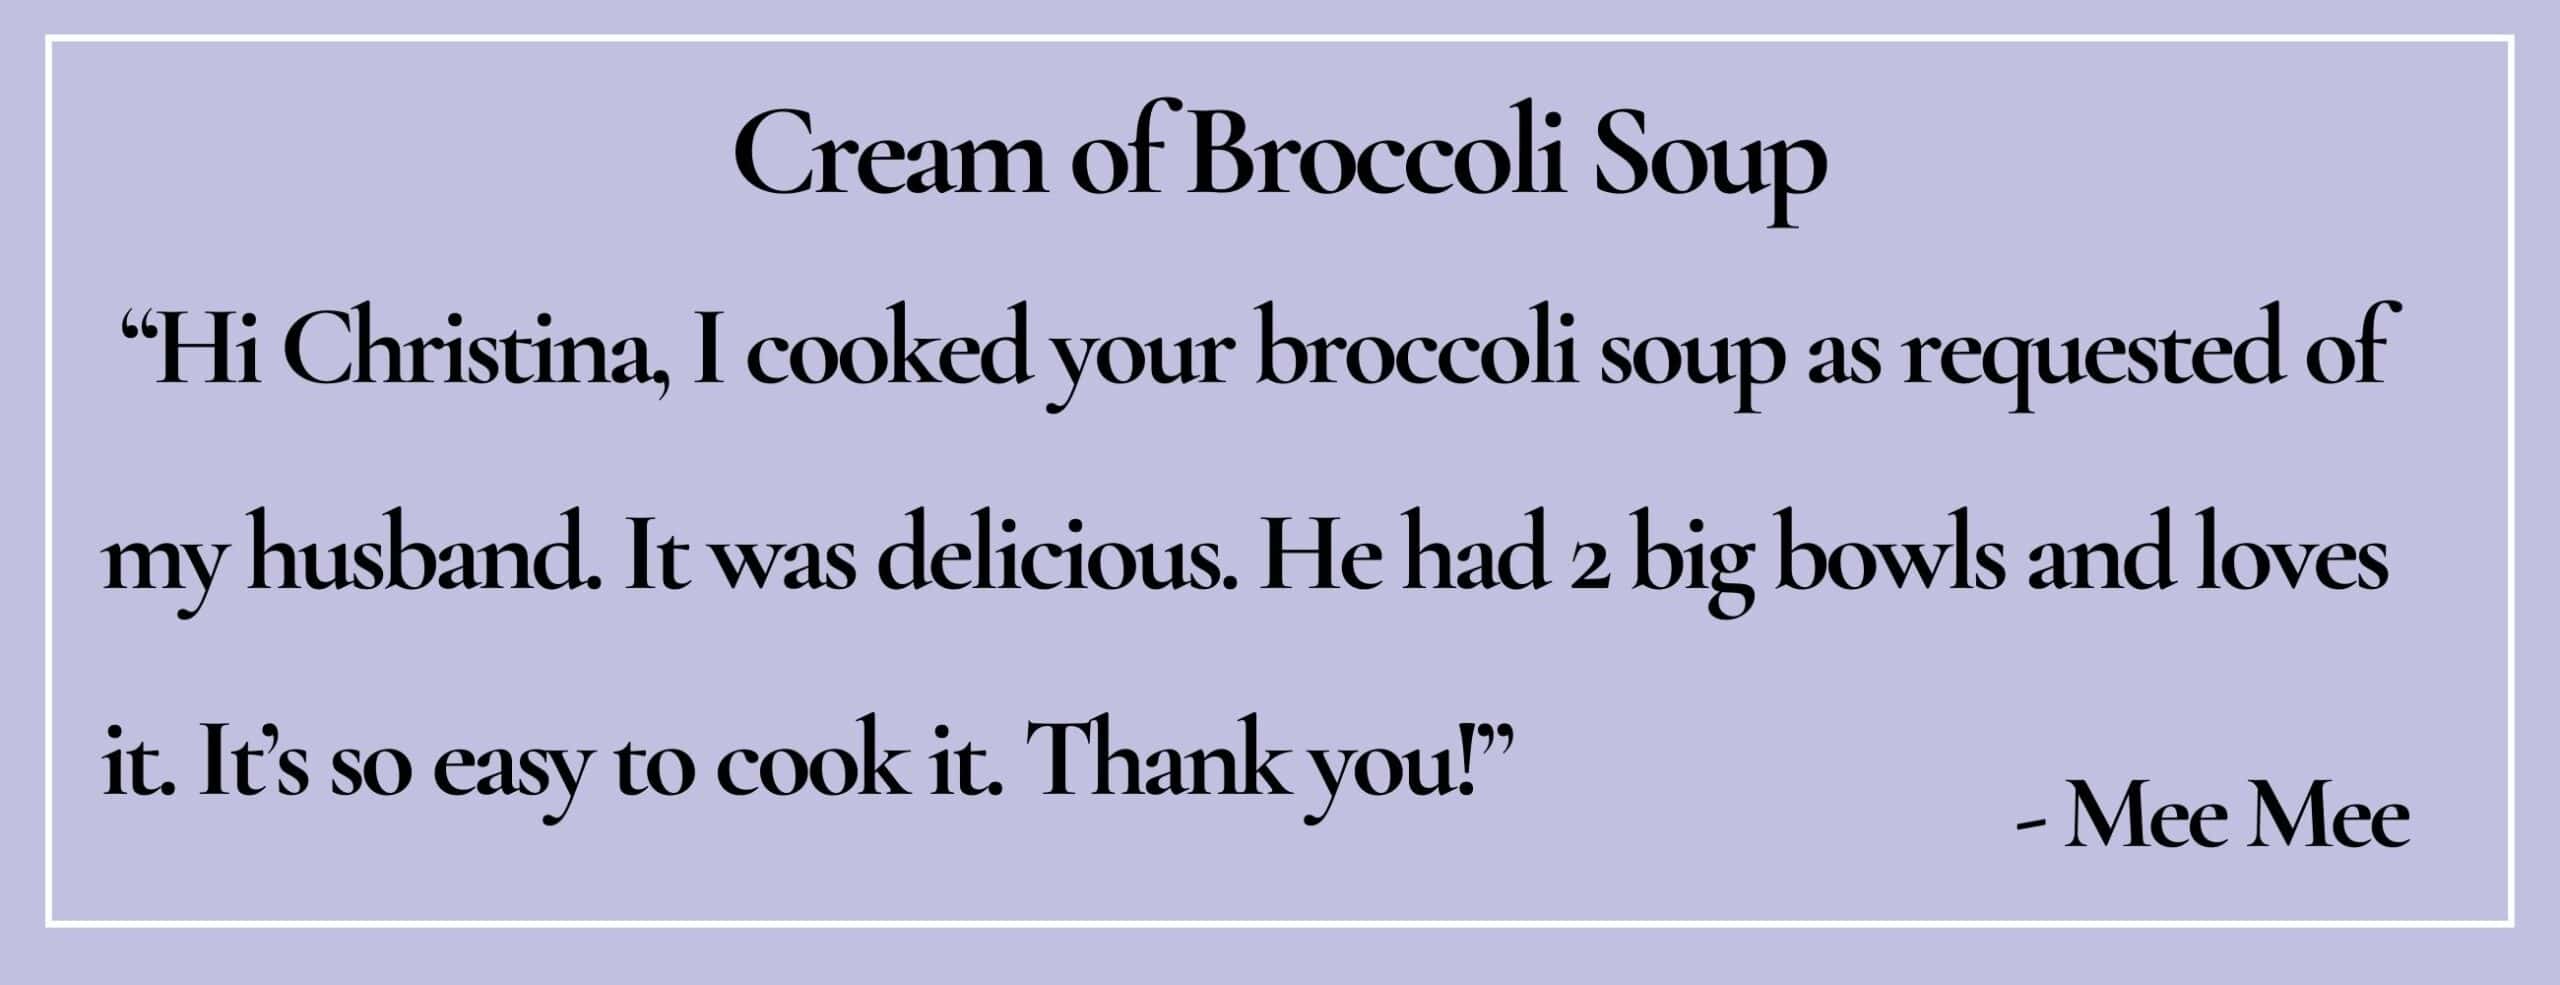 text box with paraphrase: Cooked your broccoli soup as requested of my husband. It was delicious. He had 2 bowls.- Mee Mee